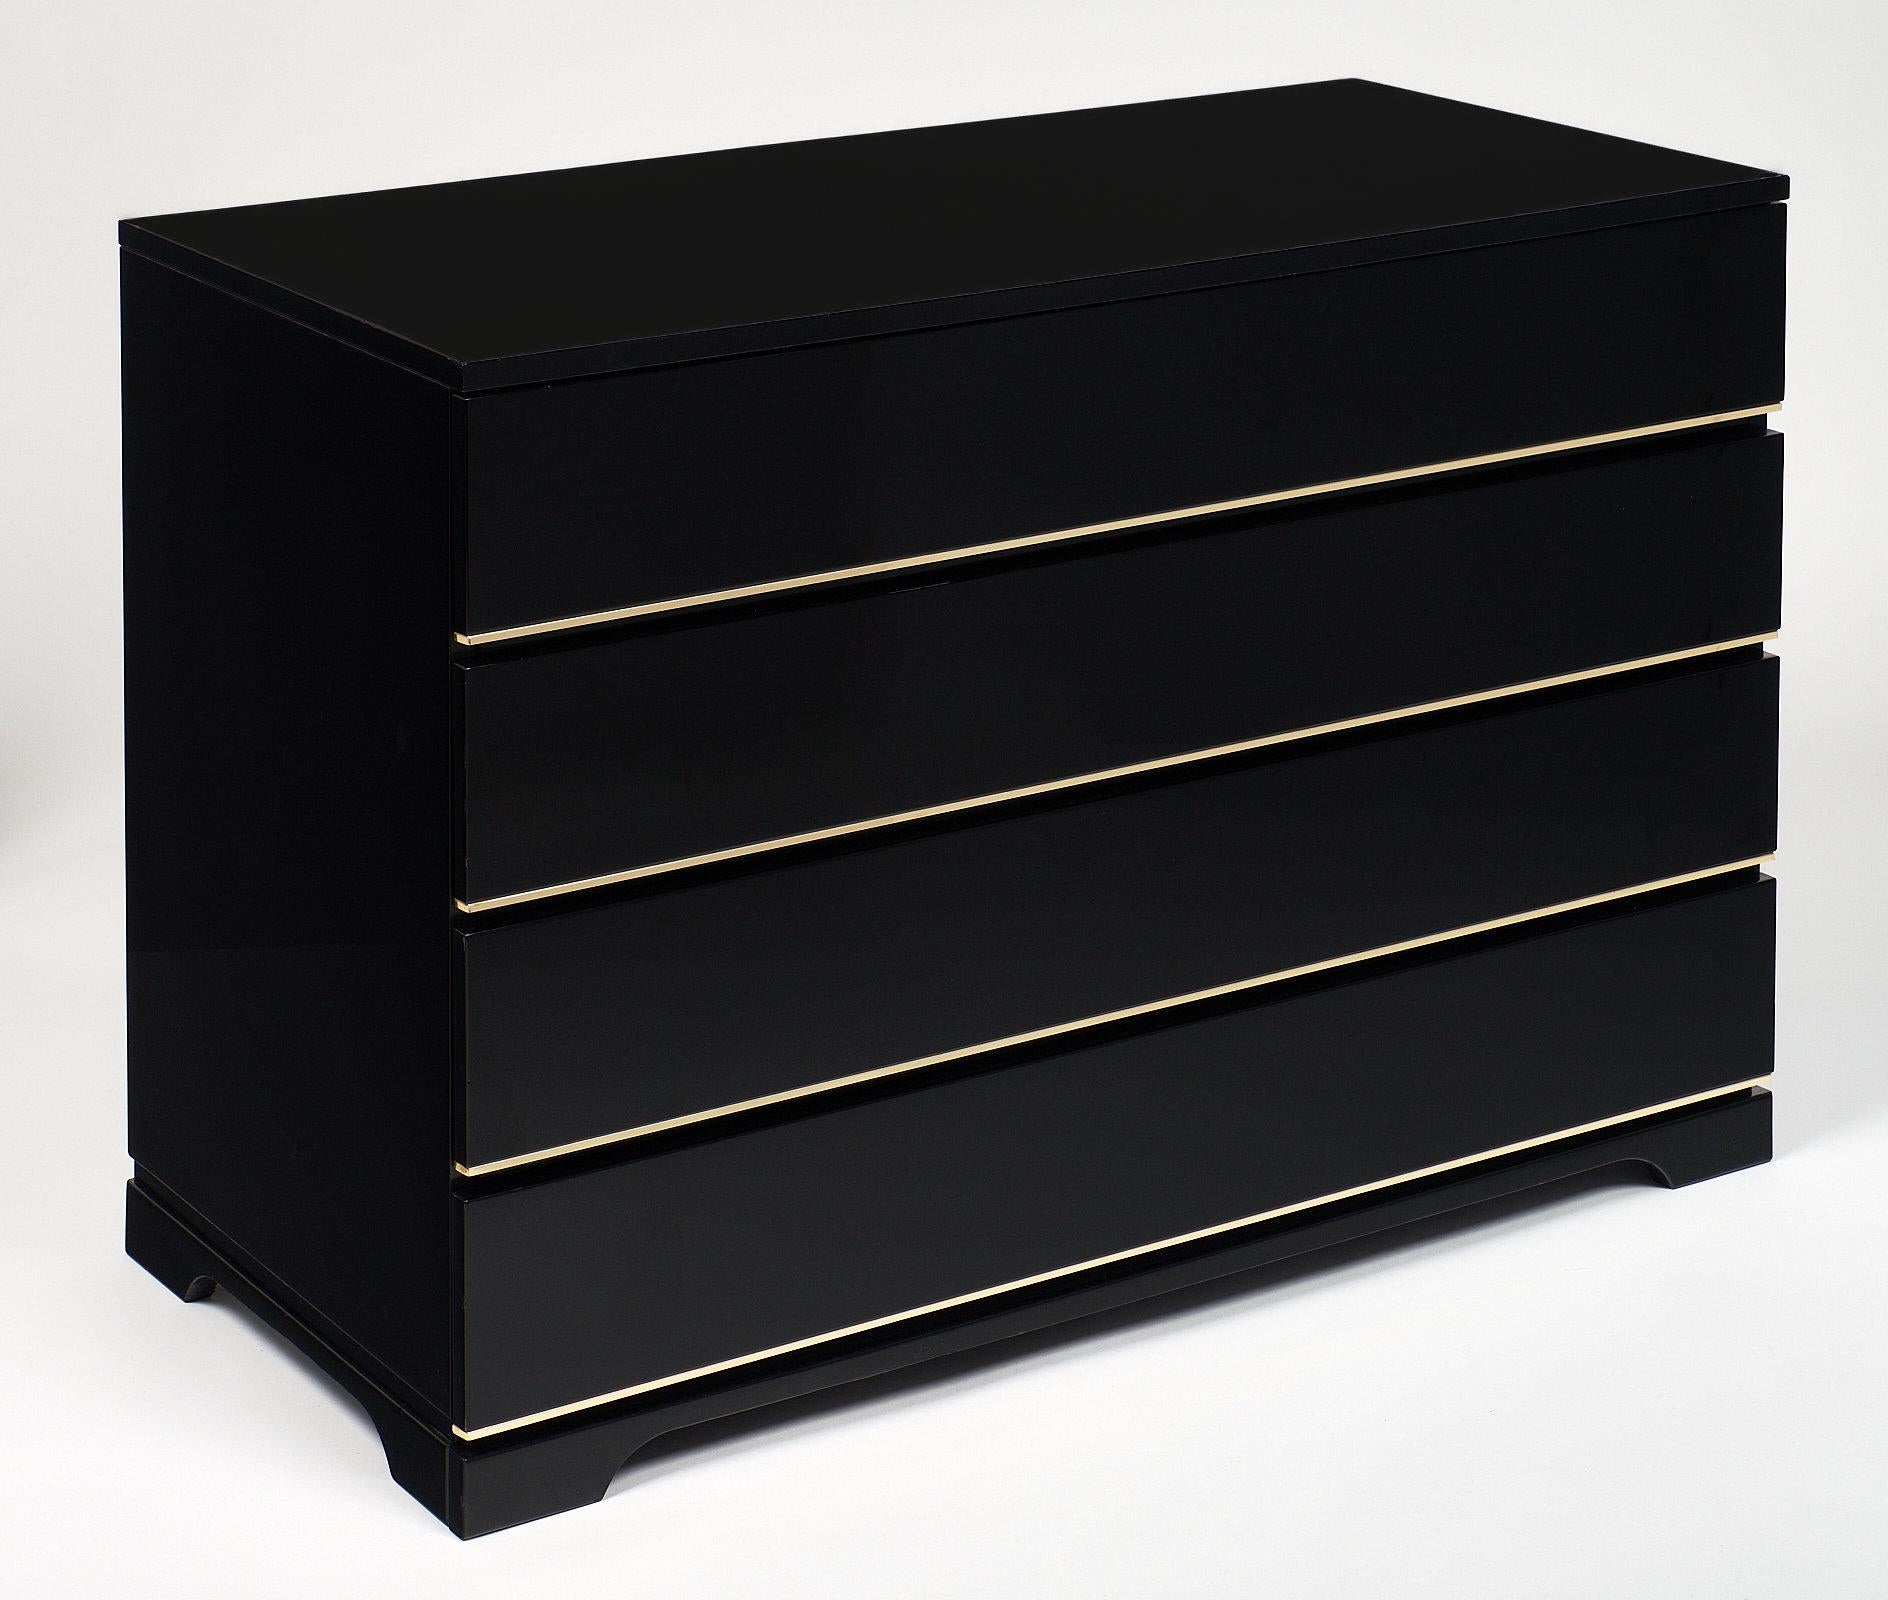 A bold yet elegant modernist French chest of four drawers in fine condition with brass trims. Made of wood and lacquered, this piece is in the style of designer Pierre Cardin. The functional, strong cabinet will keep its low understated profile